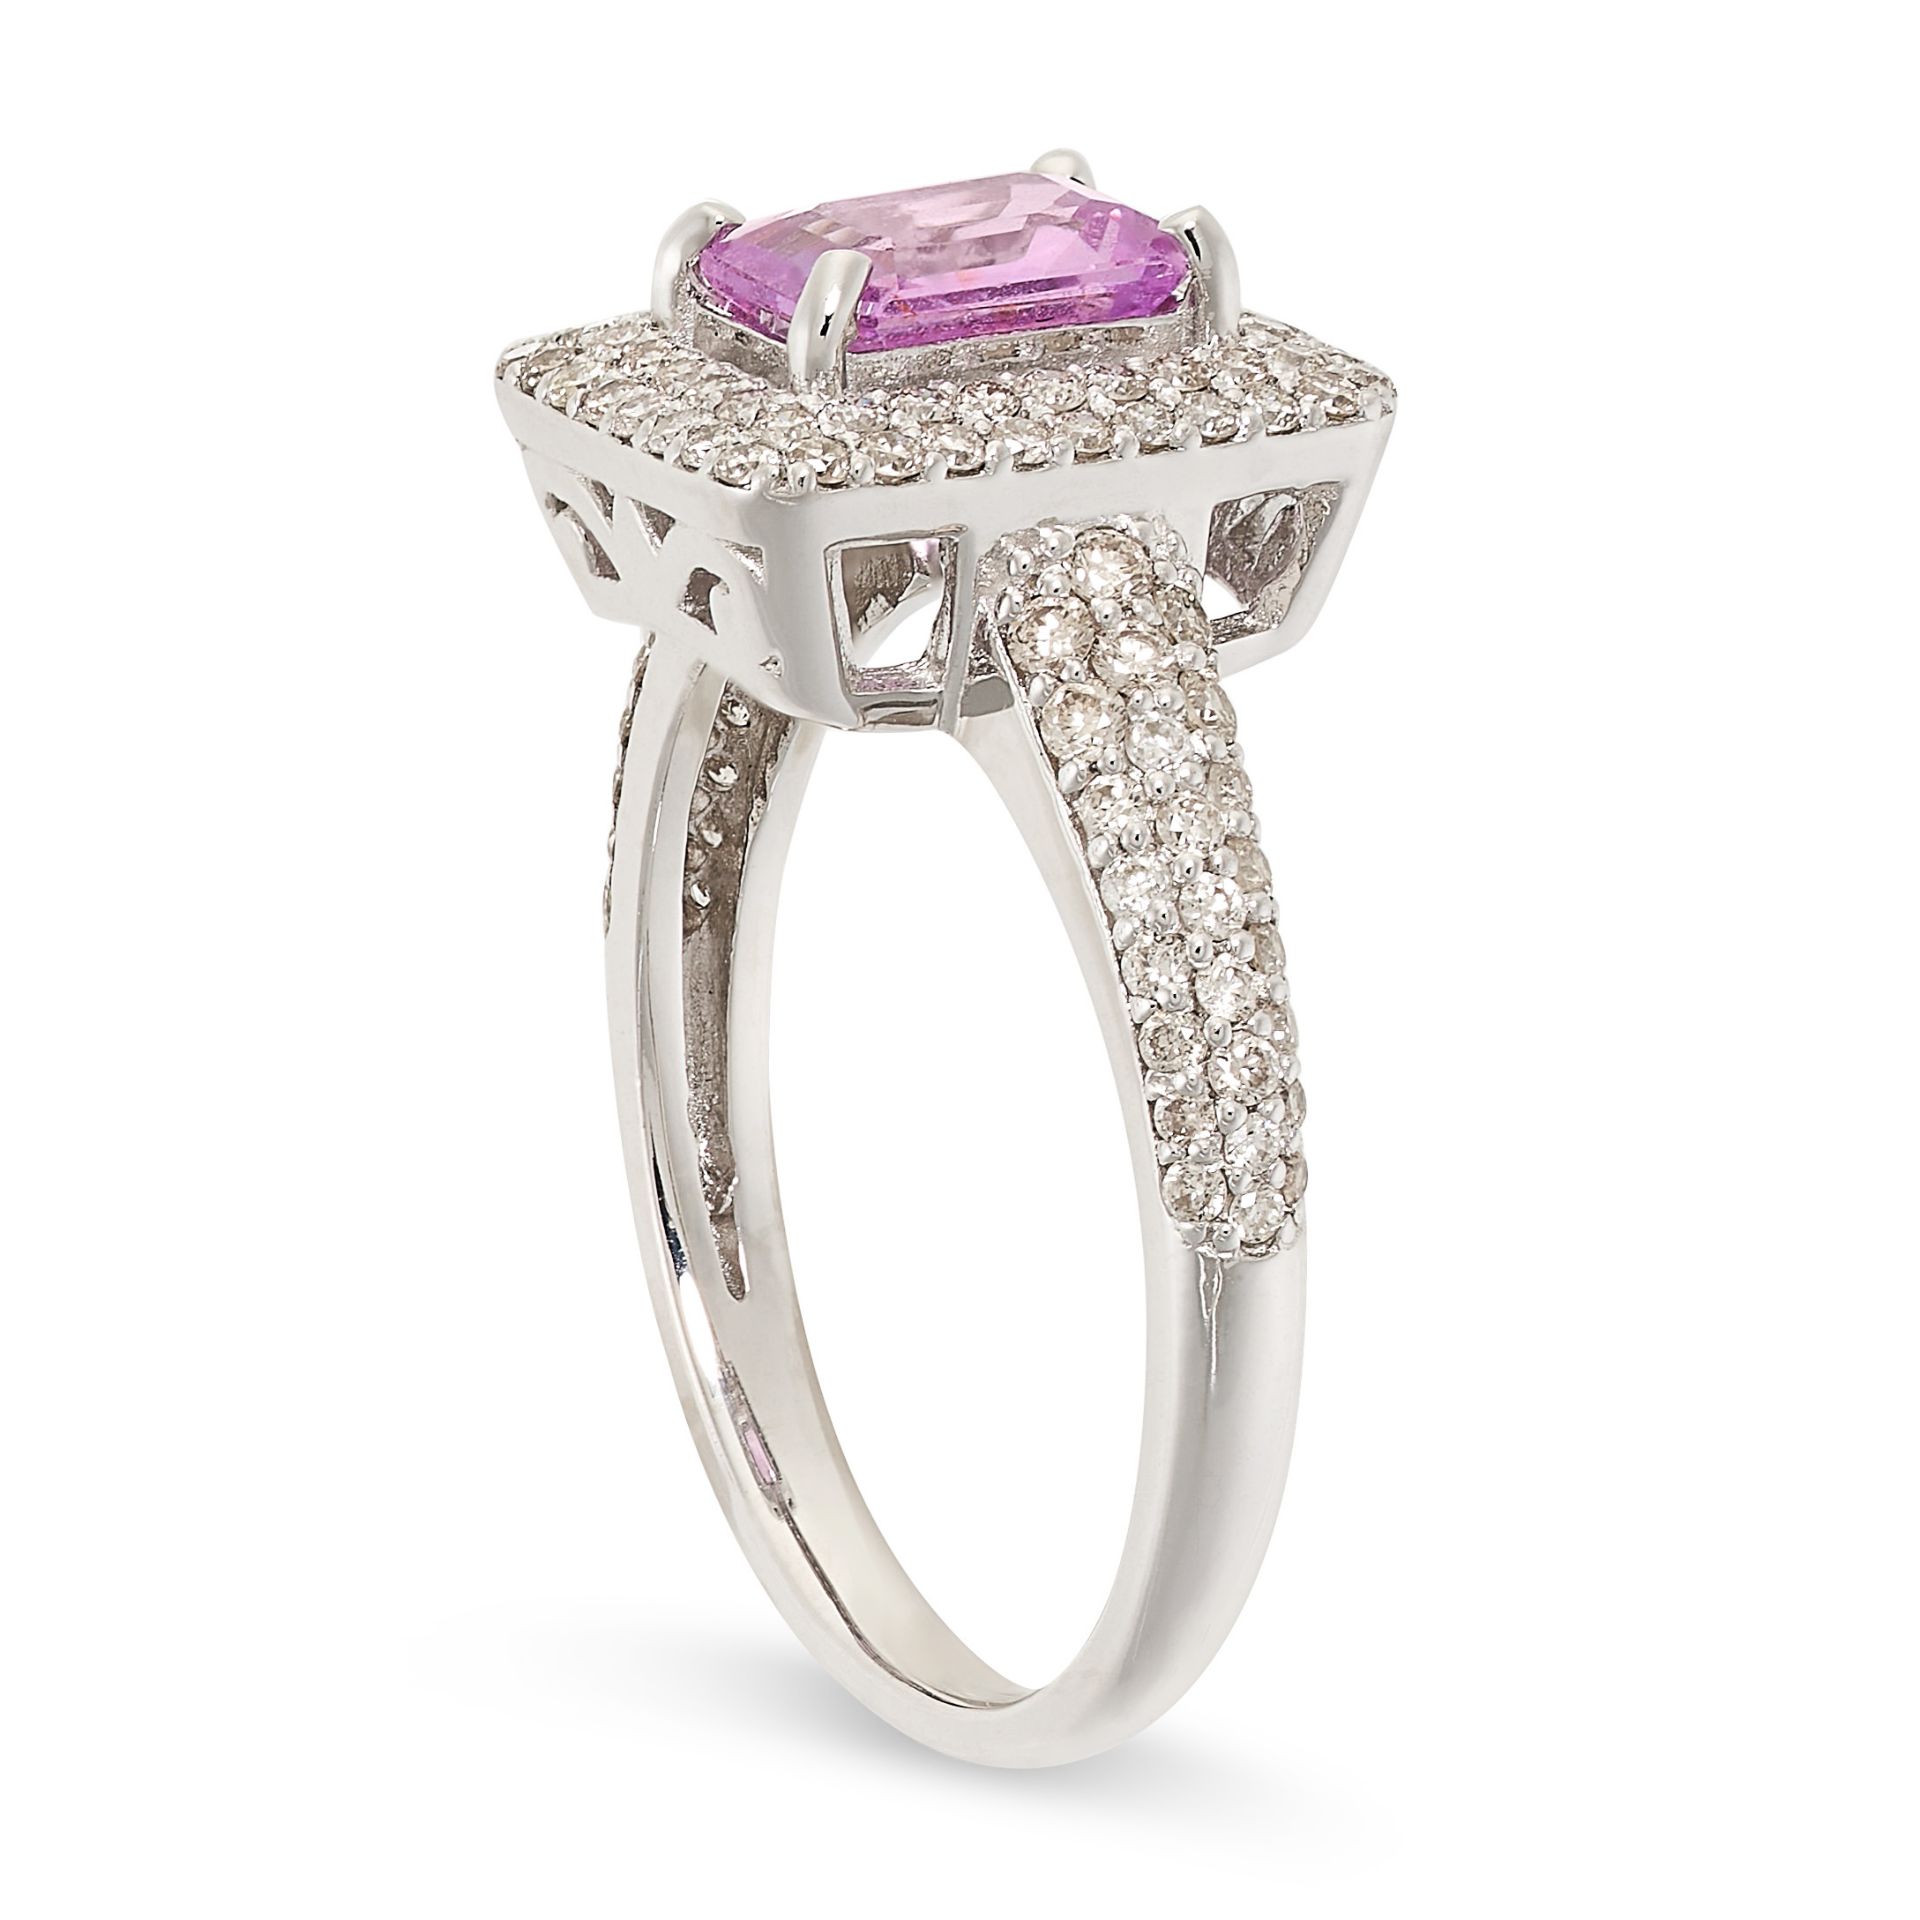 A PINK SAPPHIRE AND DIAMOND DRESS RING in 18ct white gold, set with an emerald cut pink sapphire - Image 2 of 2